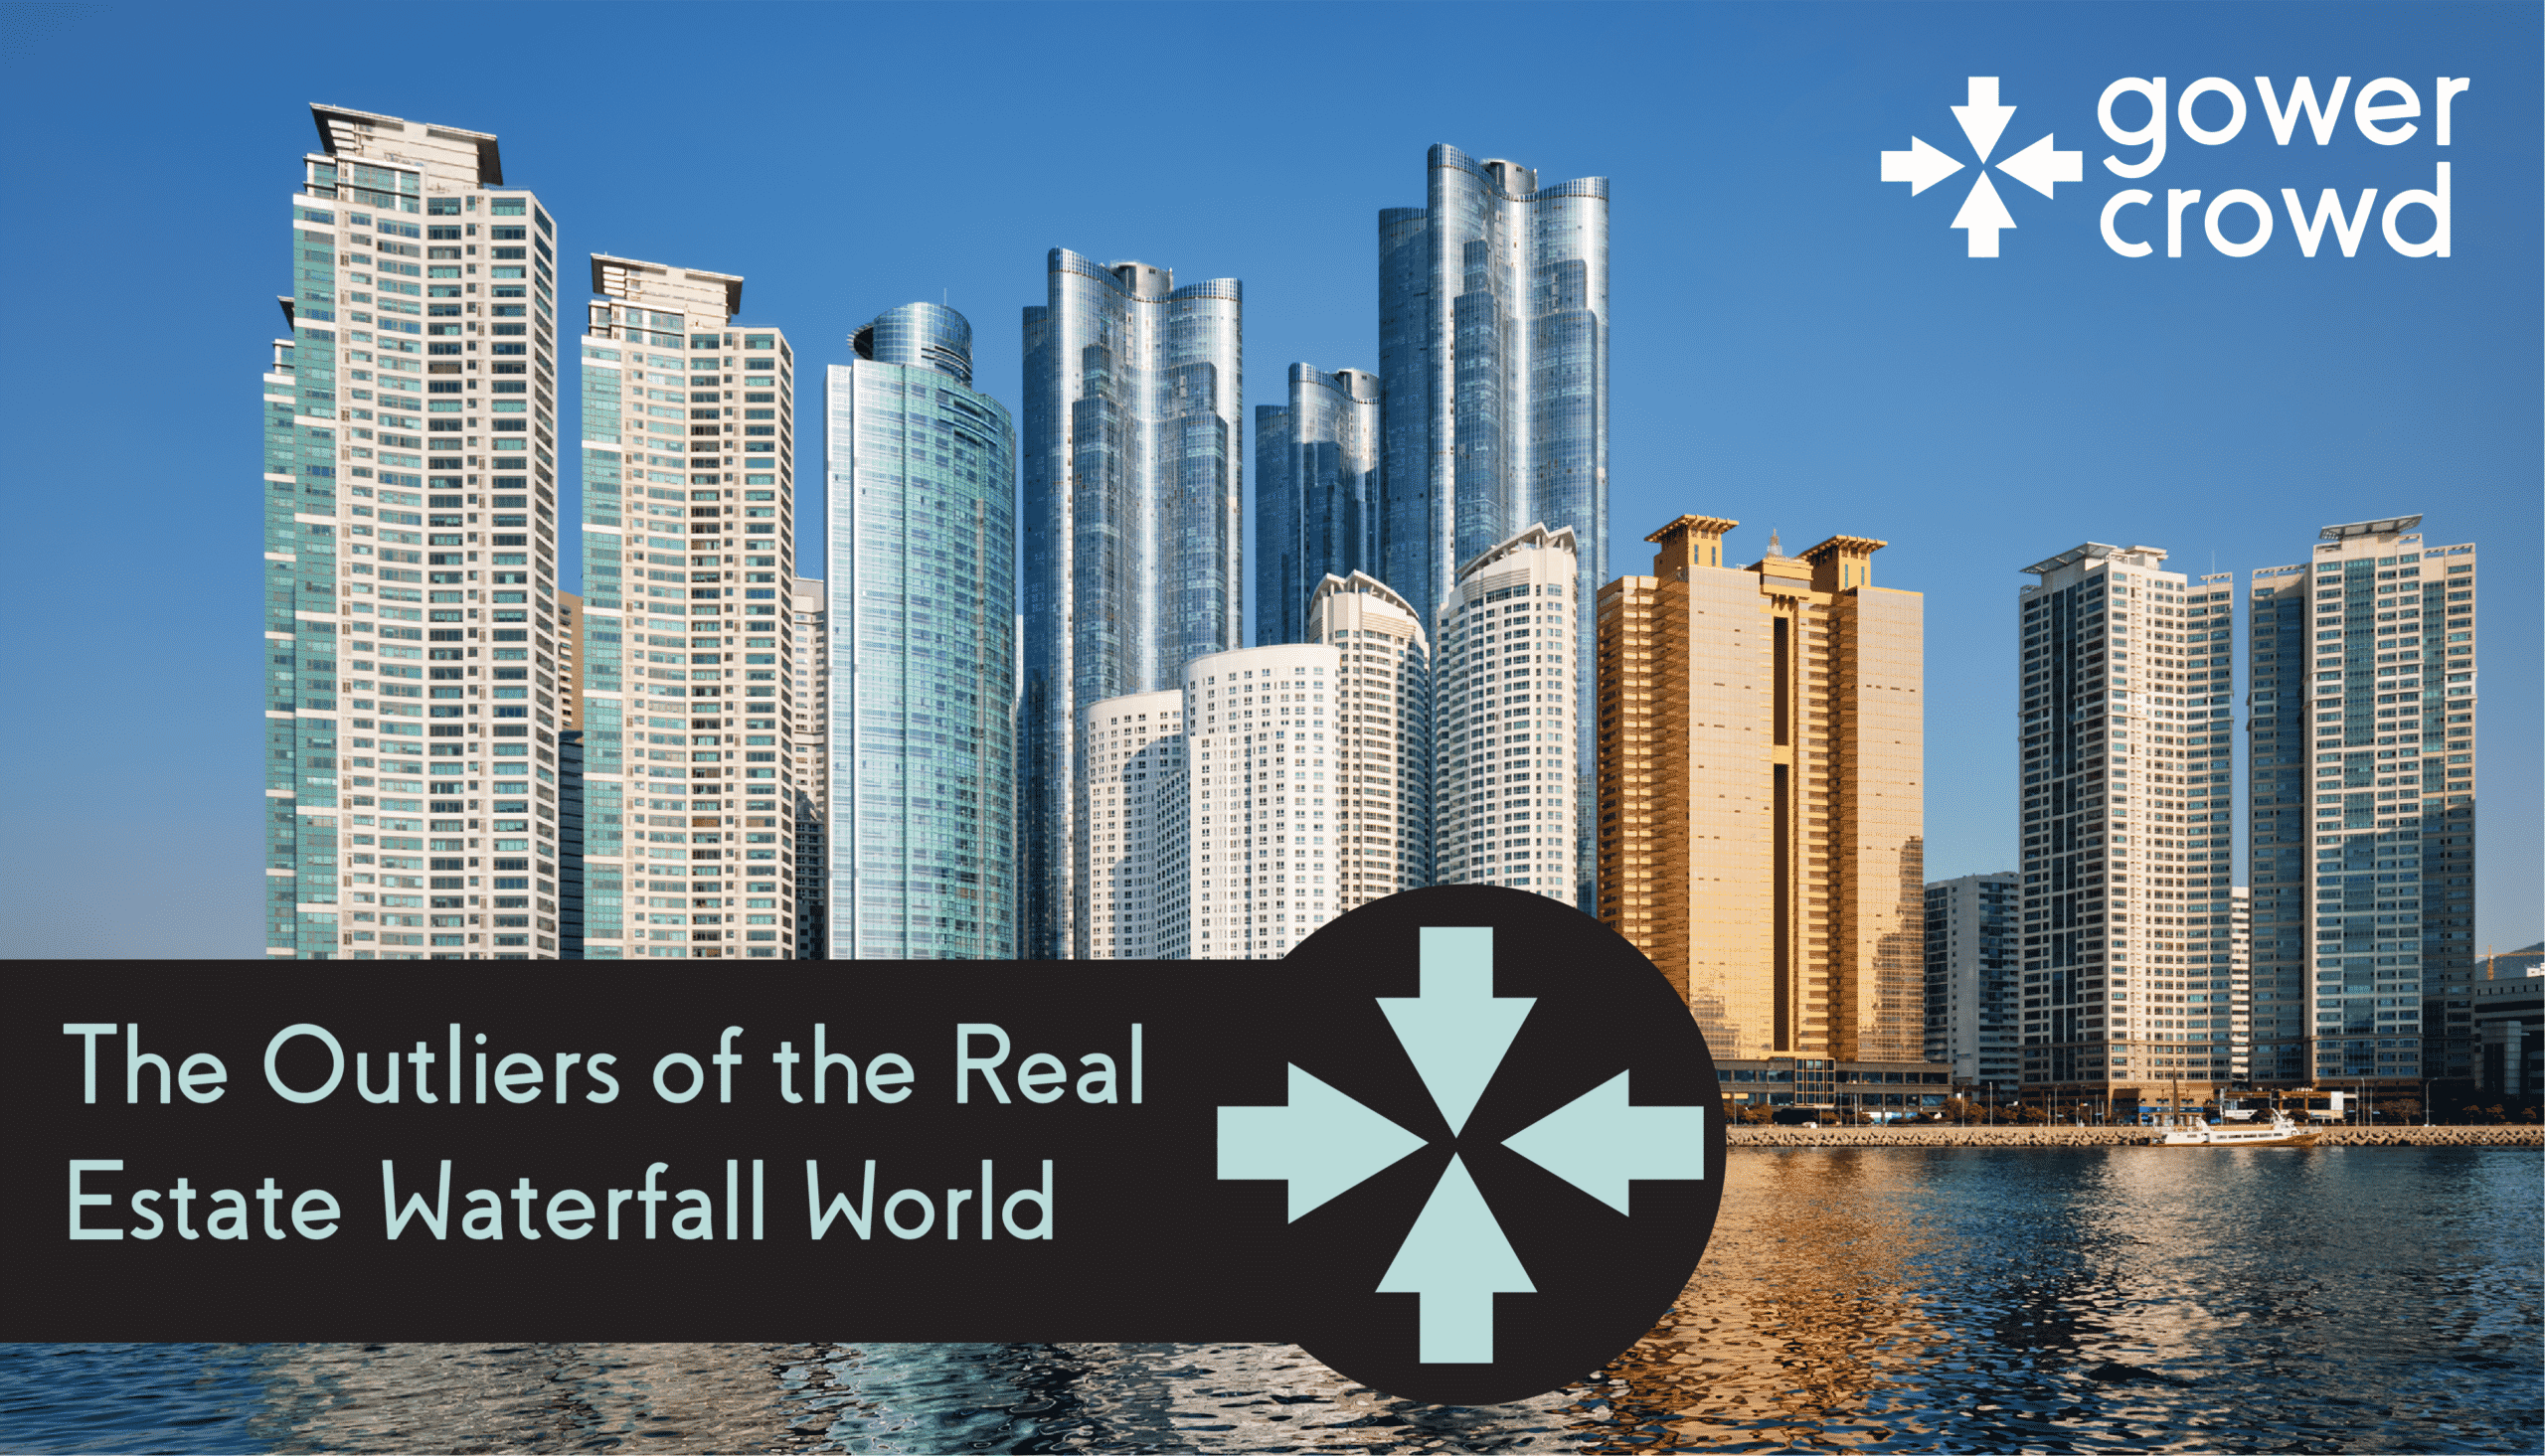 The outliers of the real estate waterfall world